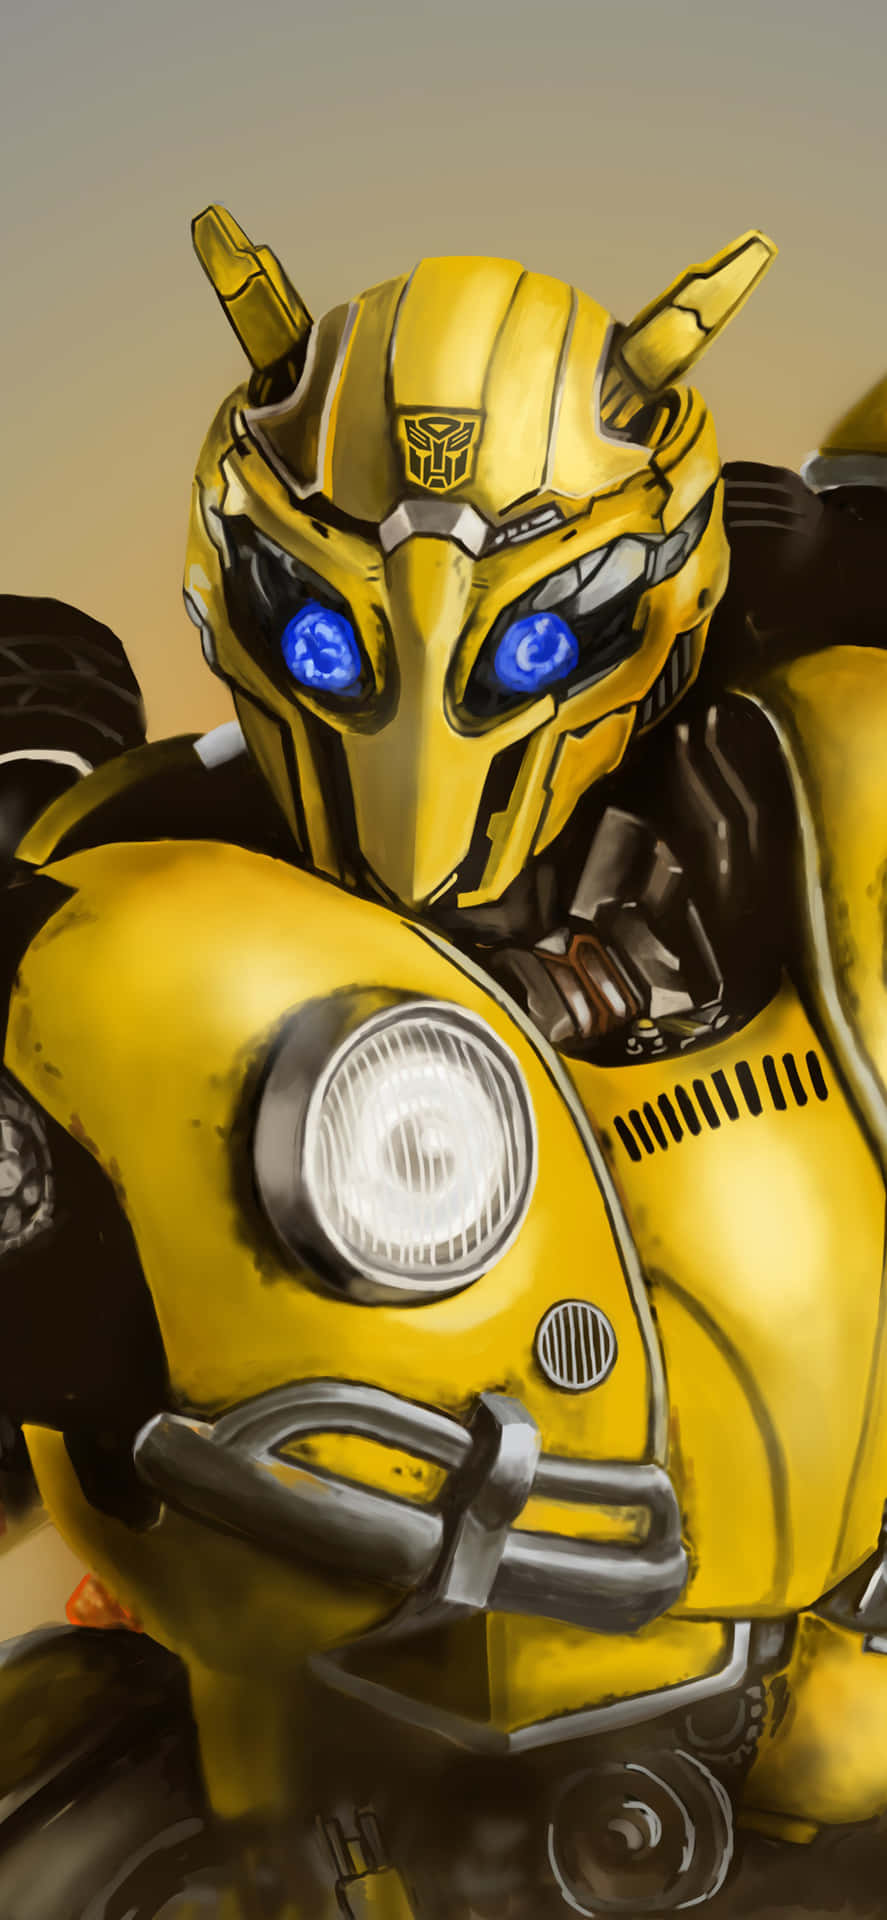 A Yellow Robot With Blue Eyes Is Sitting On A Motorcycle